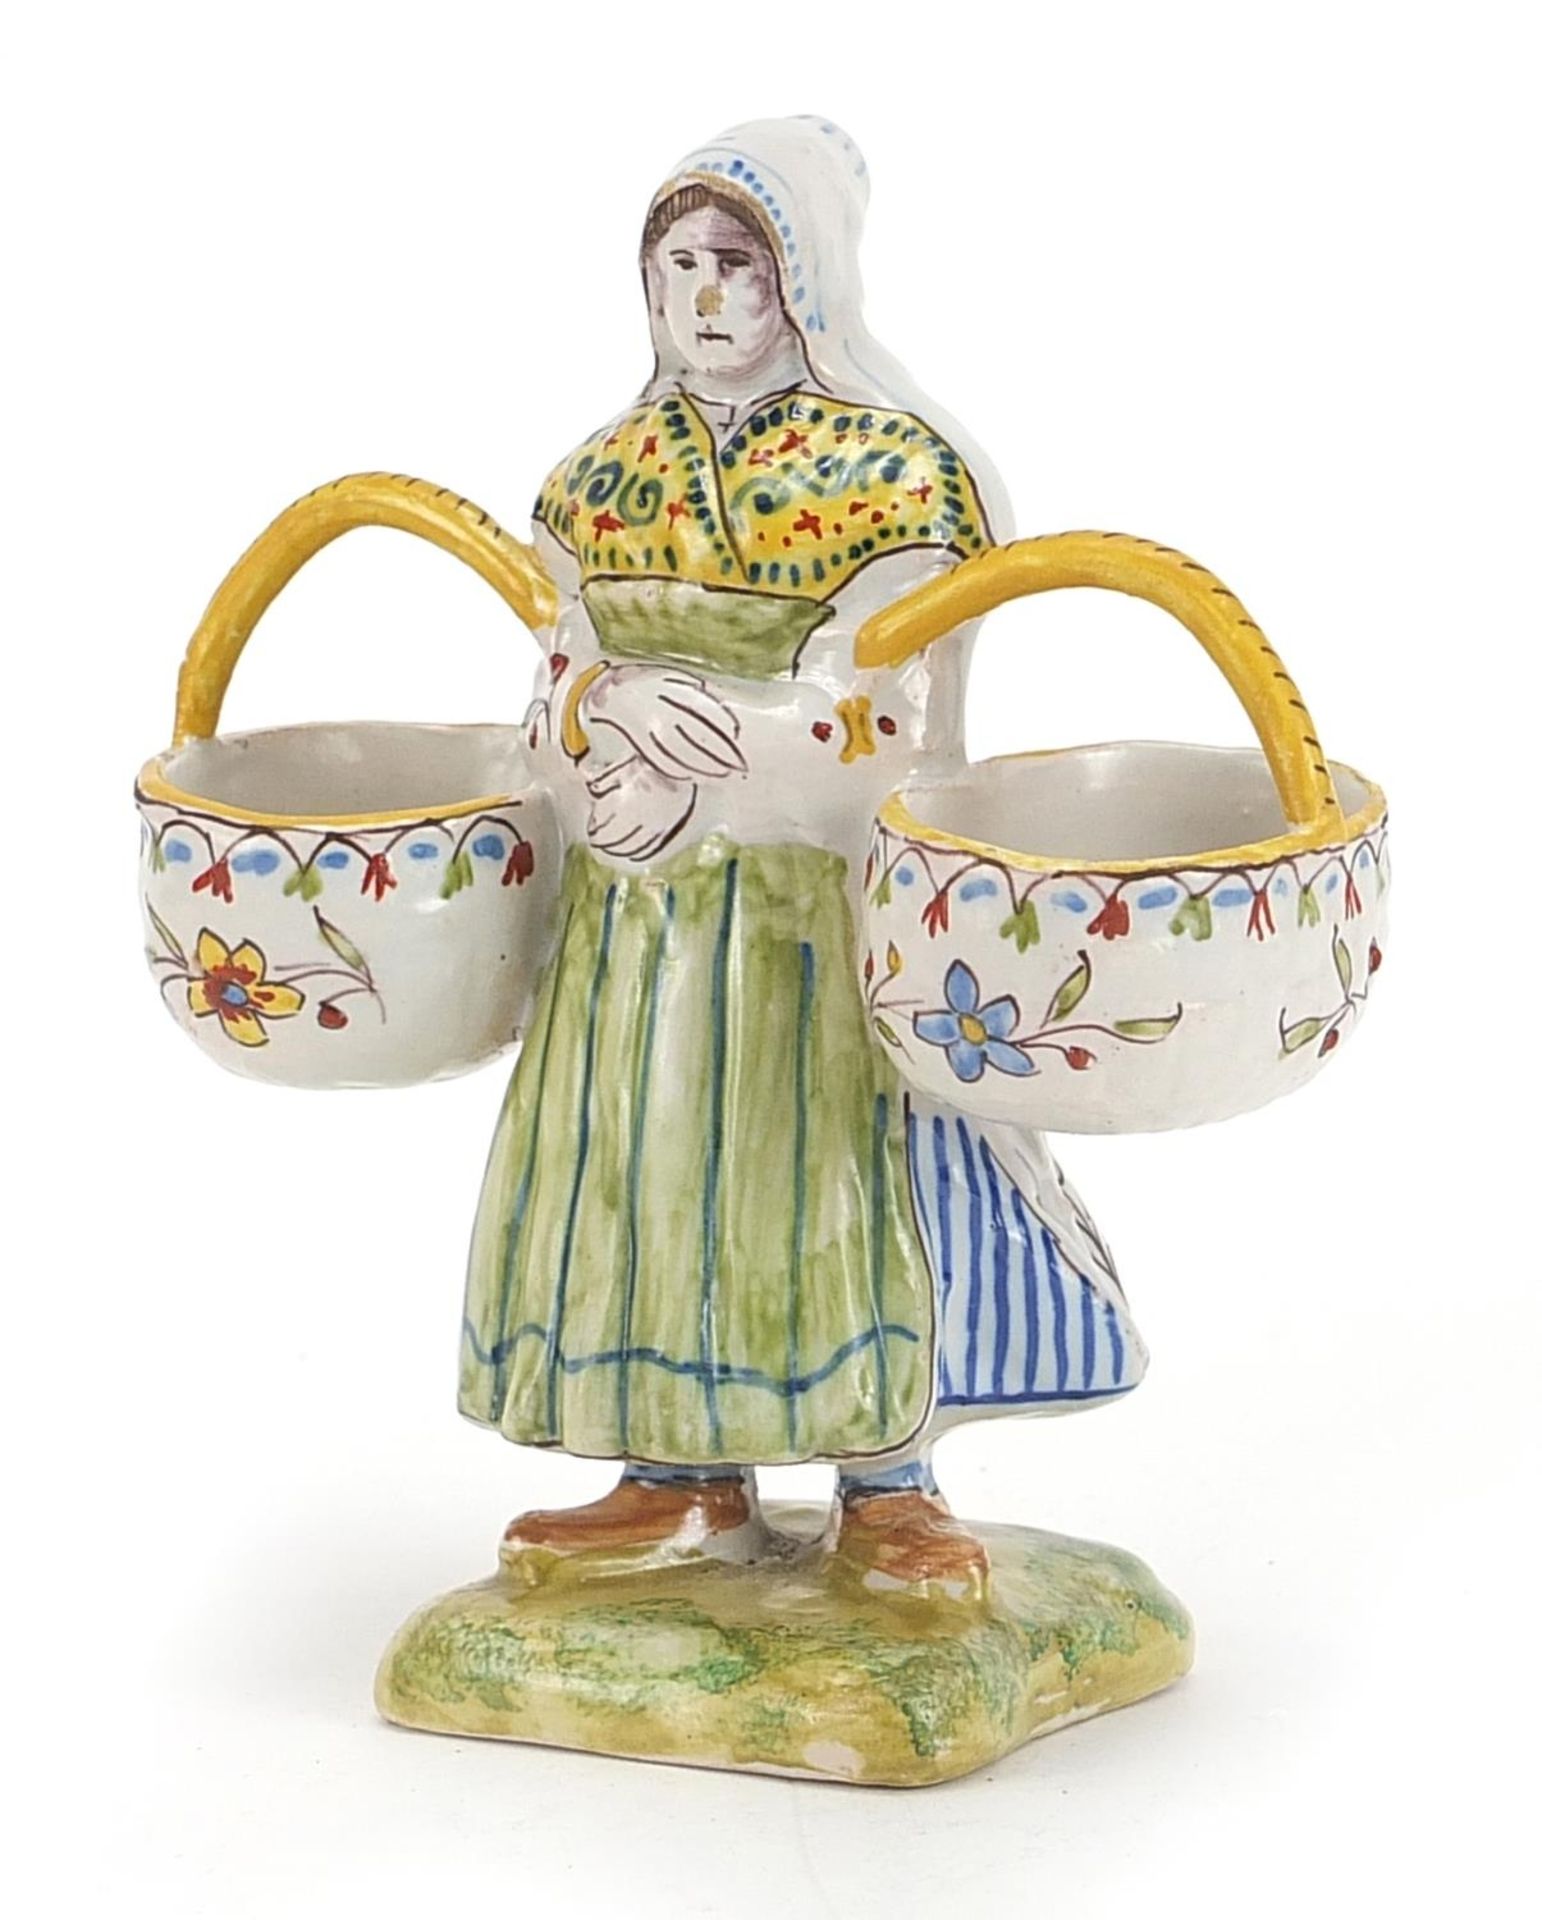 French faience glazed double table salt in the form of a maid holding two baskets, inscribed